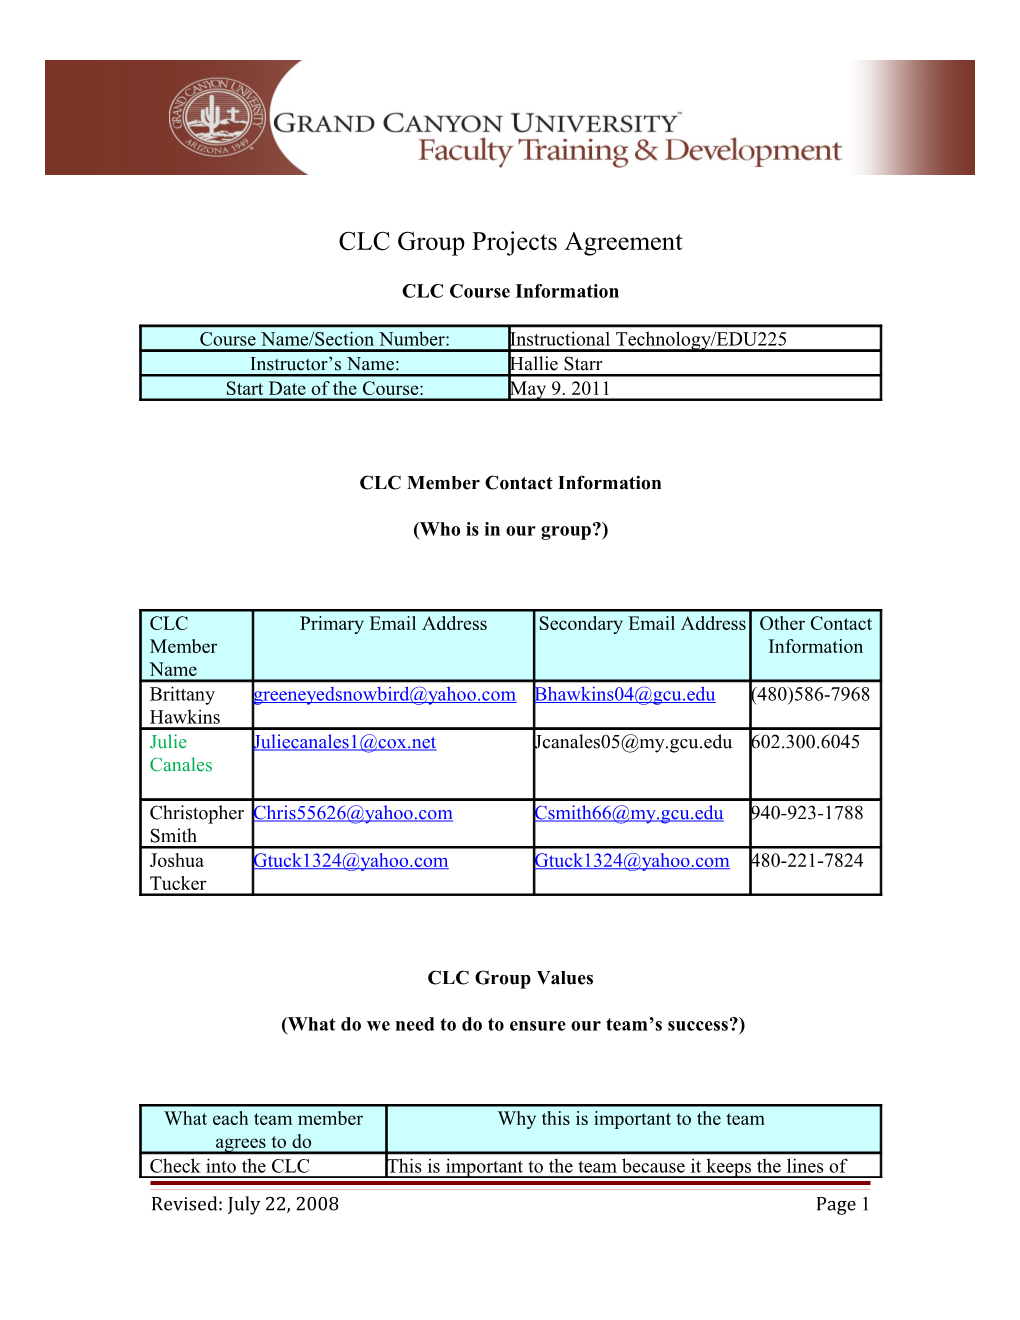 2-6 CLC Group Projects Agreement